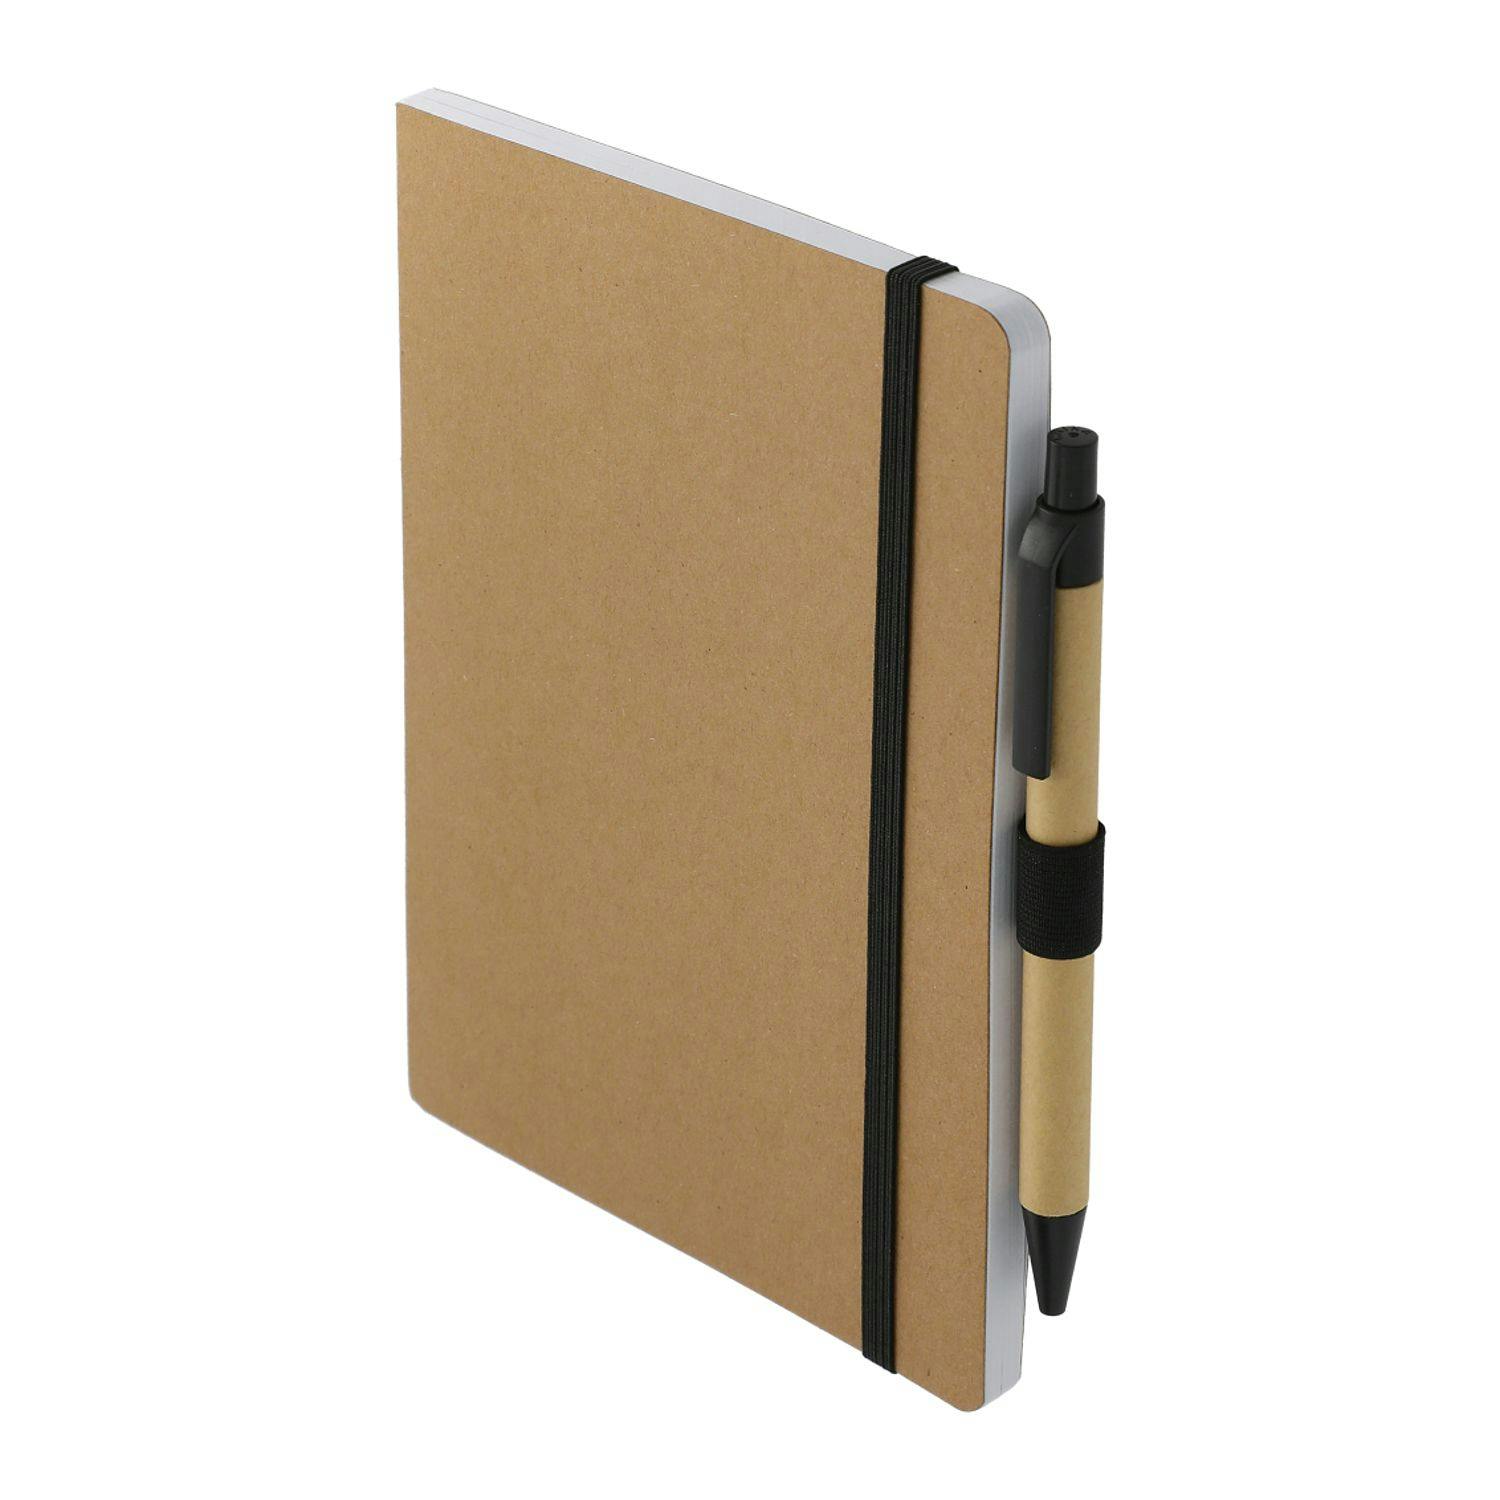 5" x 7" FSC Recycled Notebook and Pen Set - additional Image 2